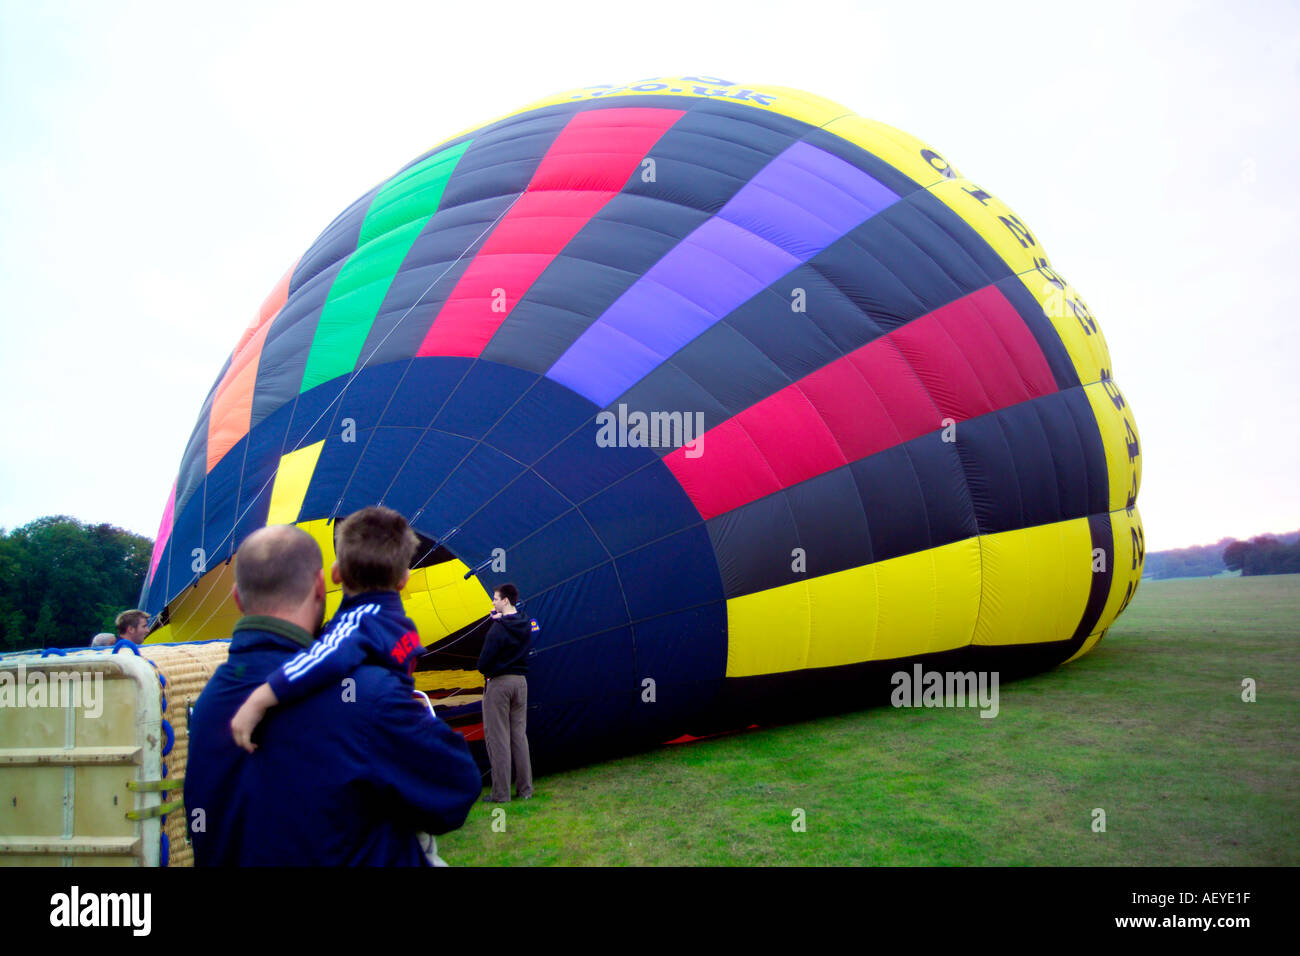 Hot air balloon being inflated Stock Photo